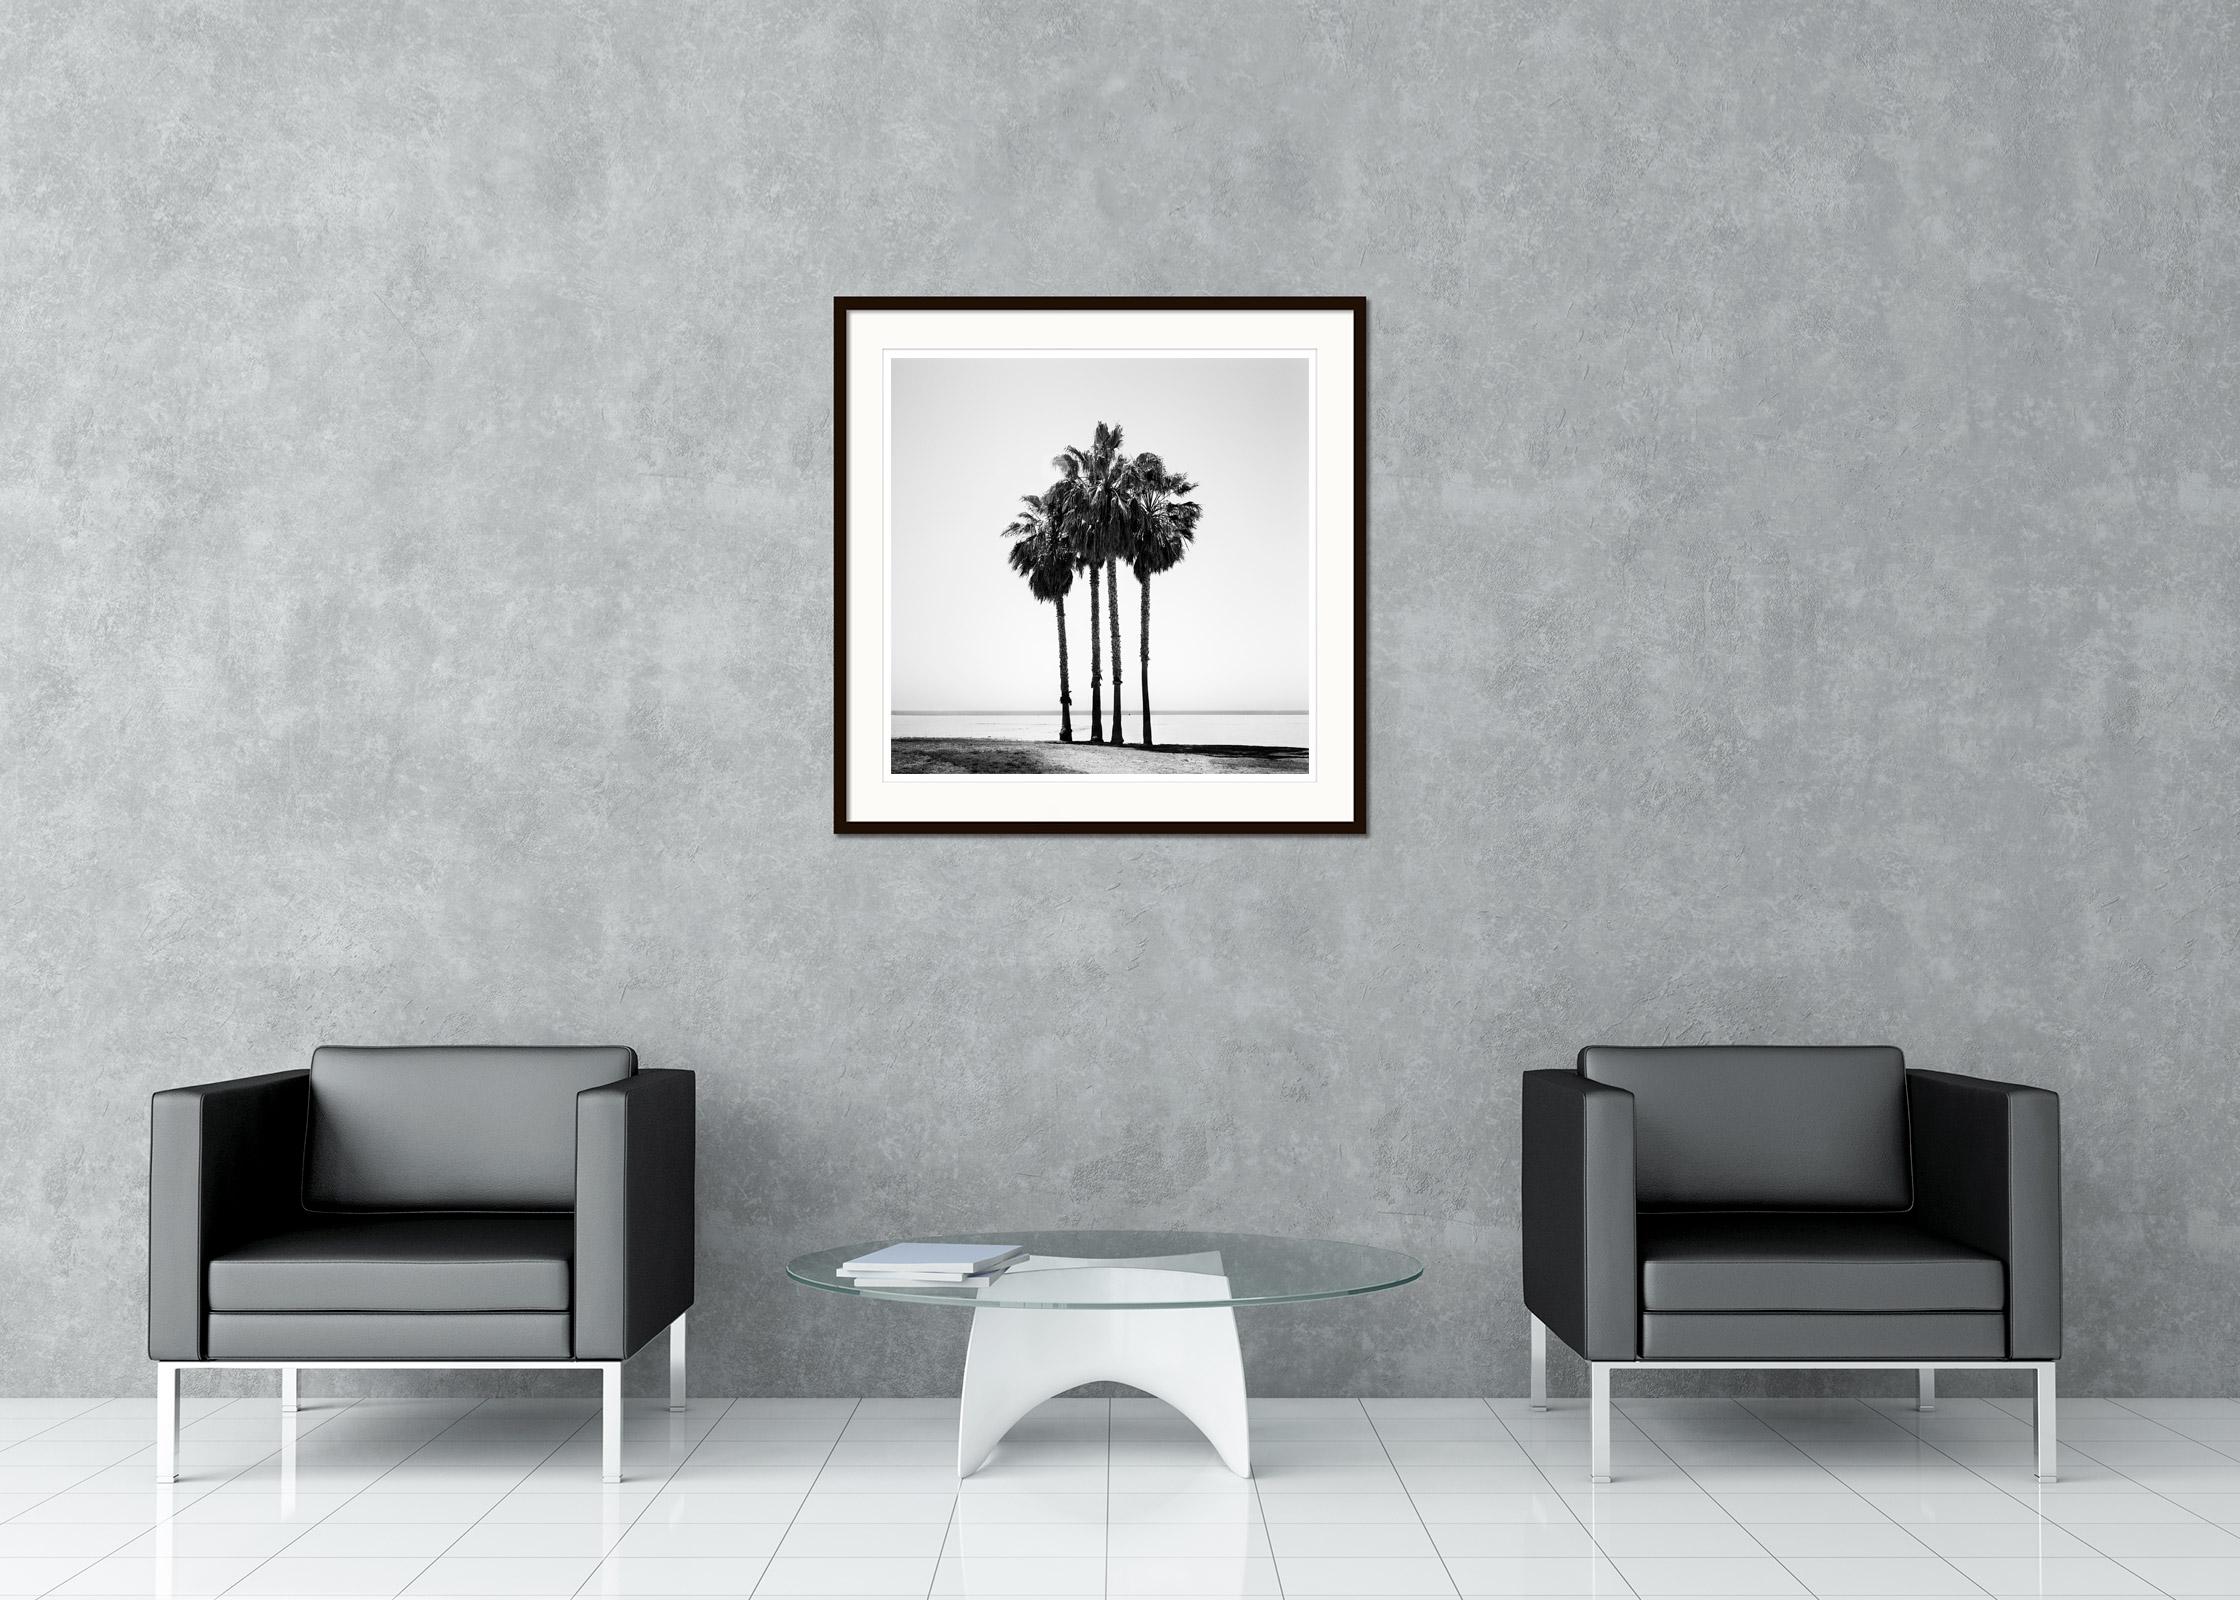 Black and white fine art landscape photography. Palm trees on beautiful Venice beach in California, Usa. Archival pigment ink print, edition of 9. Signed, titled, dated and numbered by artist. Certificate of authenticity included. Printed with 4cm